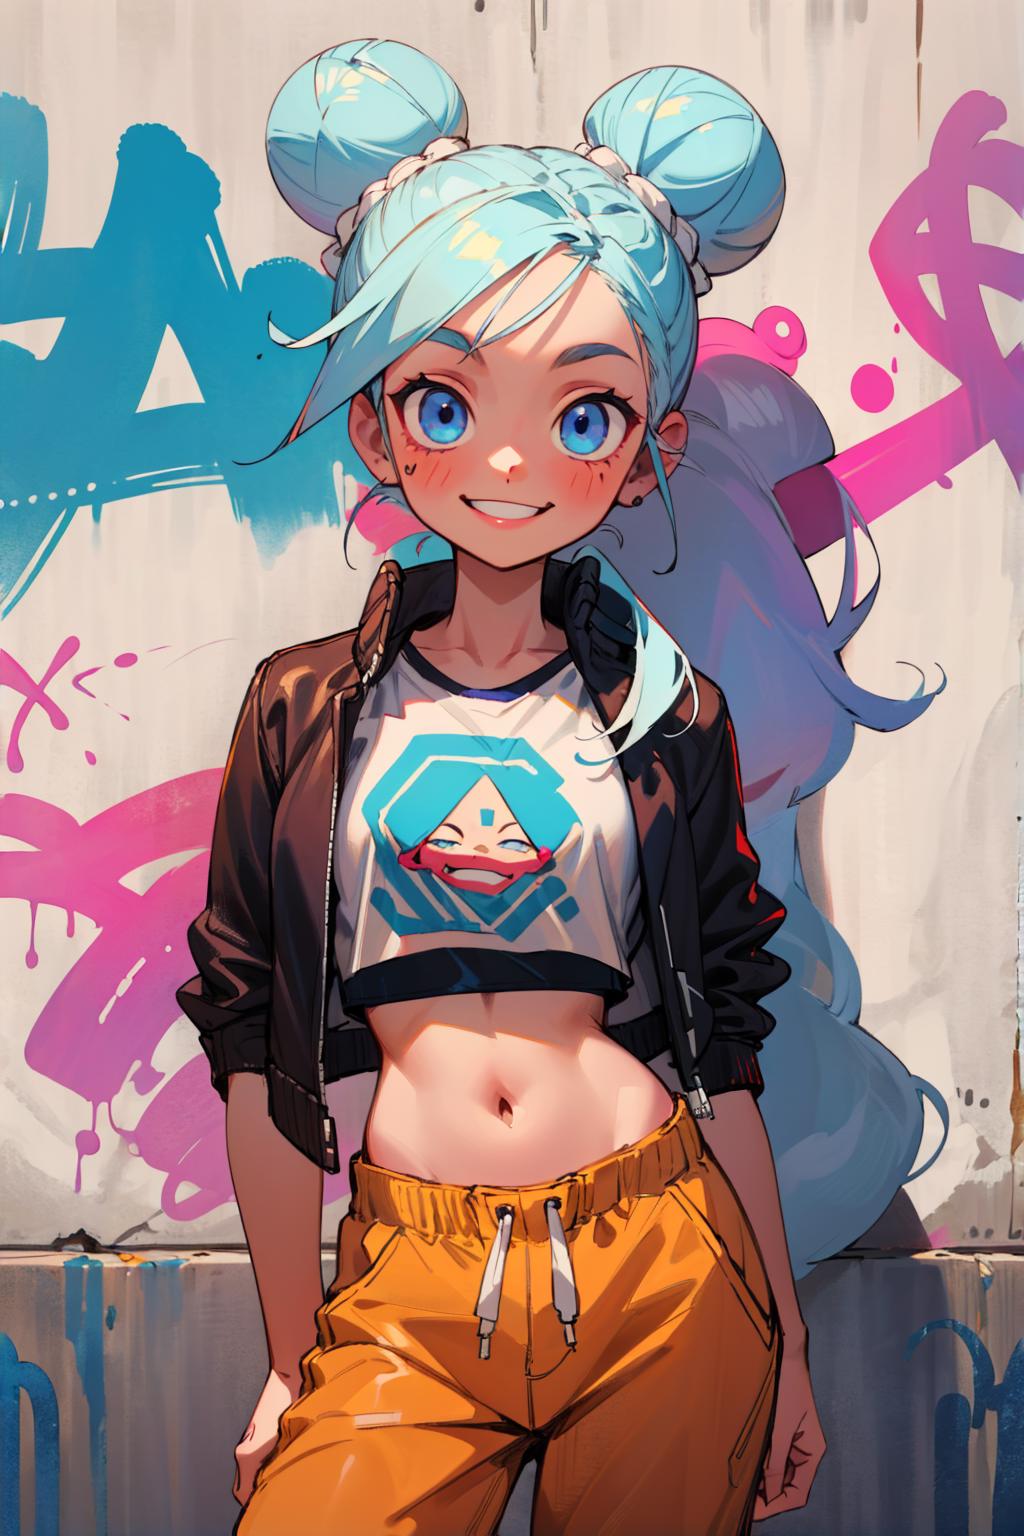 A cartoon illustration of a young girl wearing a leather jacket, a blue shirt, and yellow shorts.